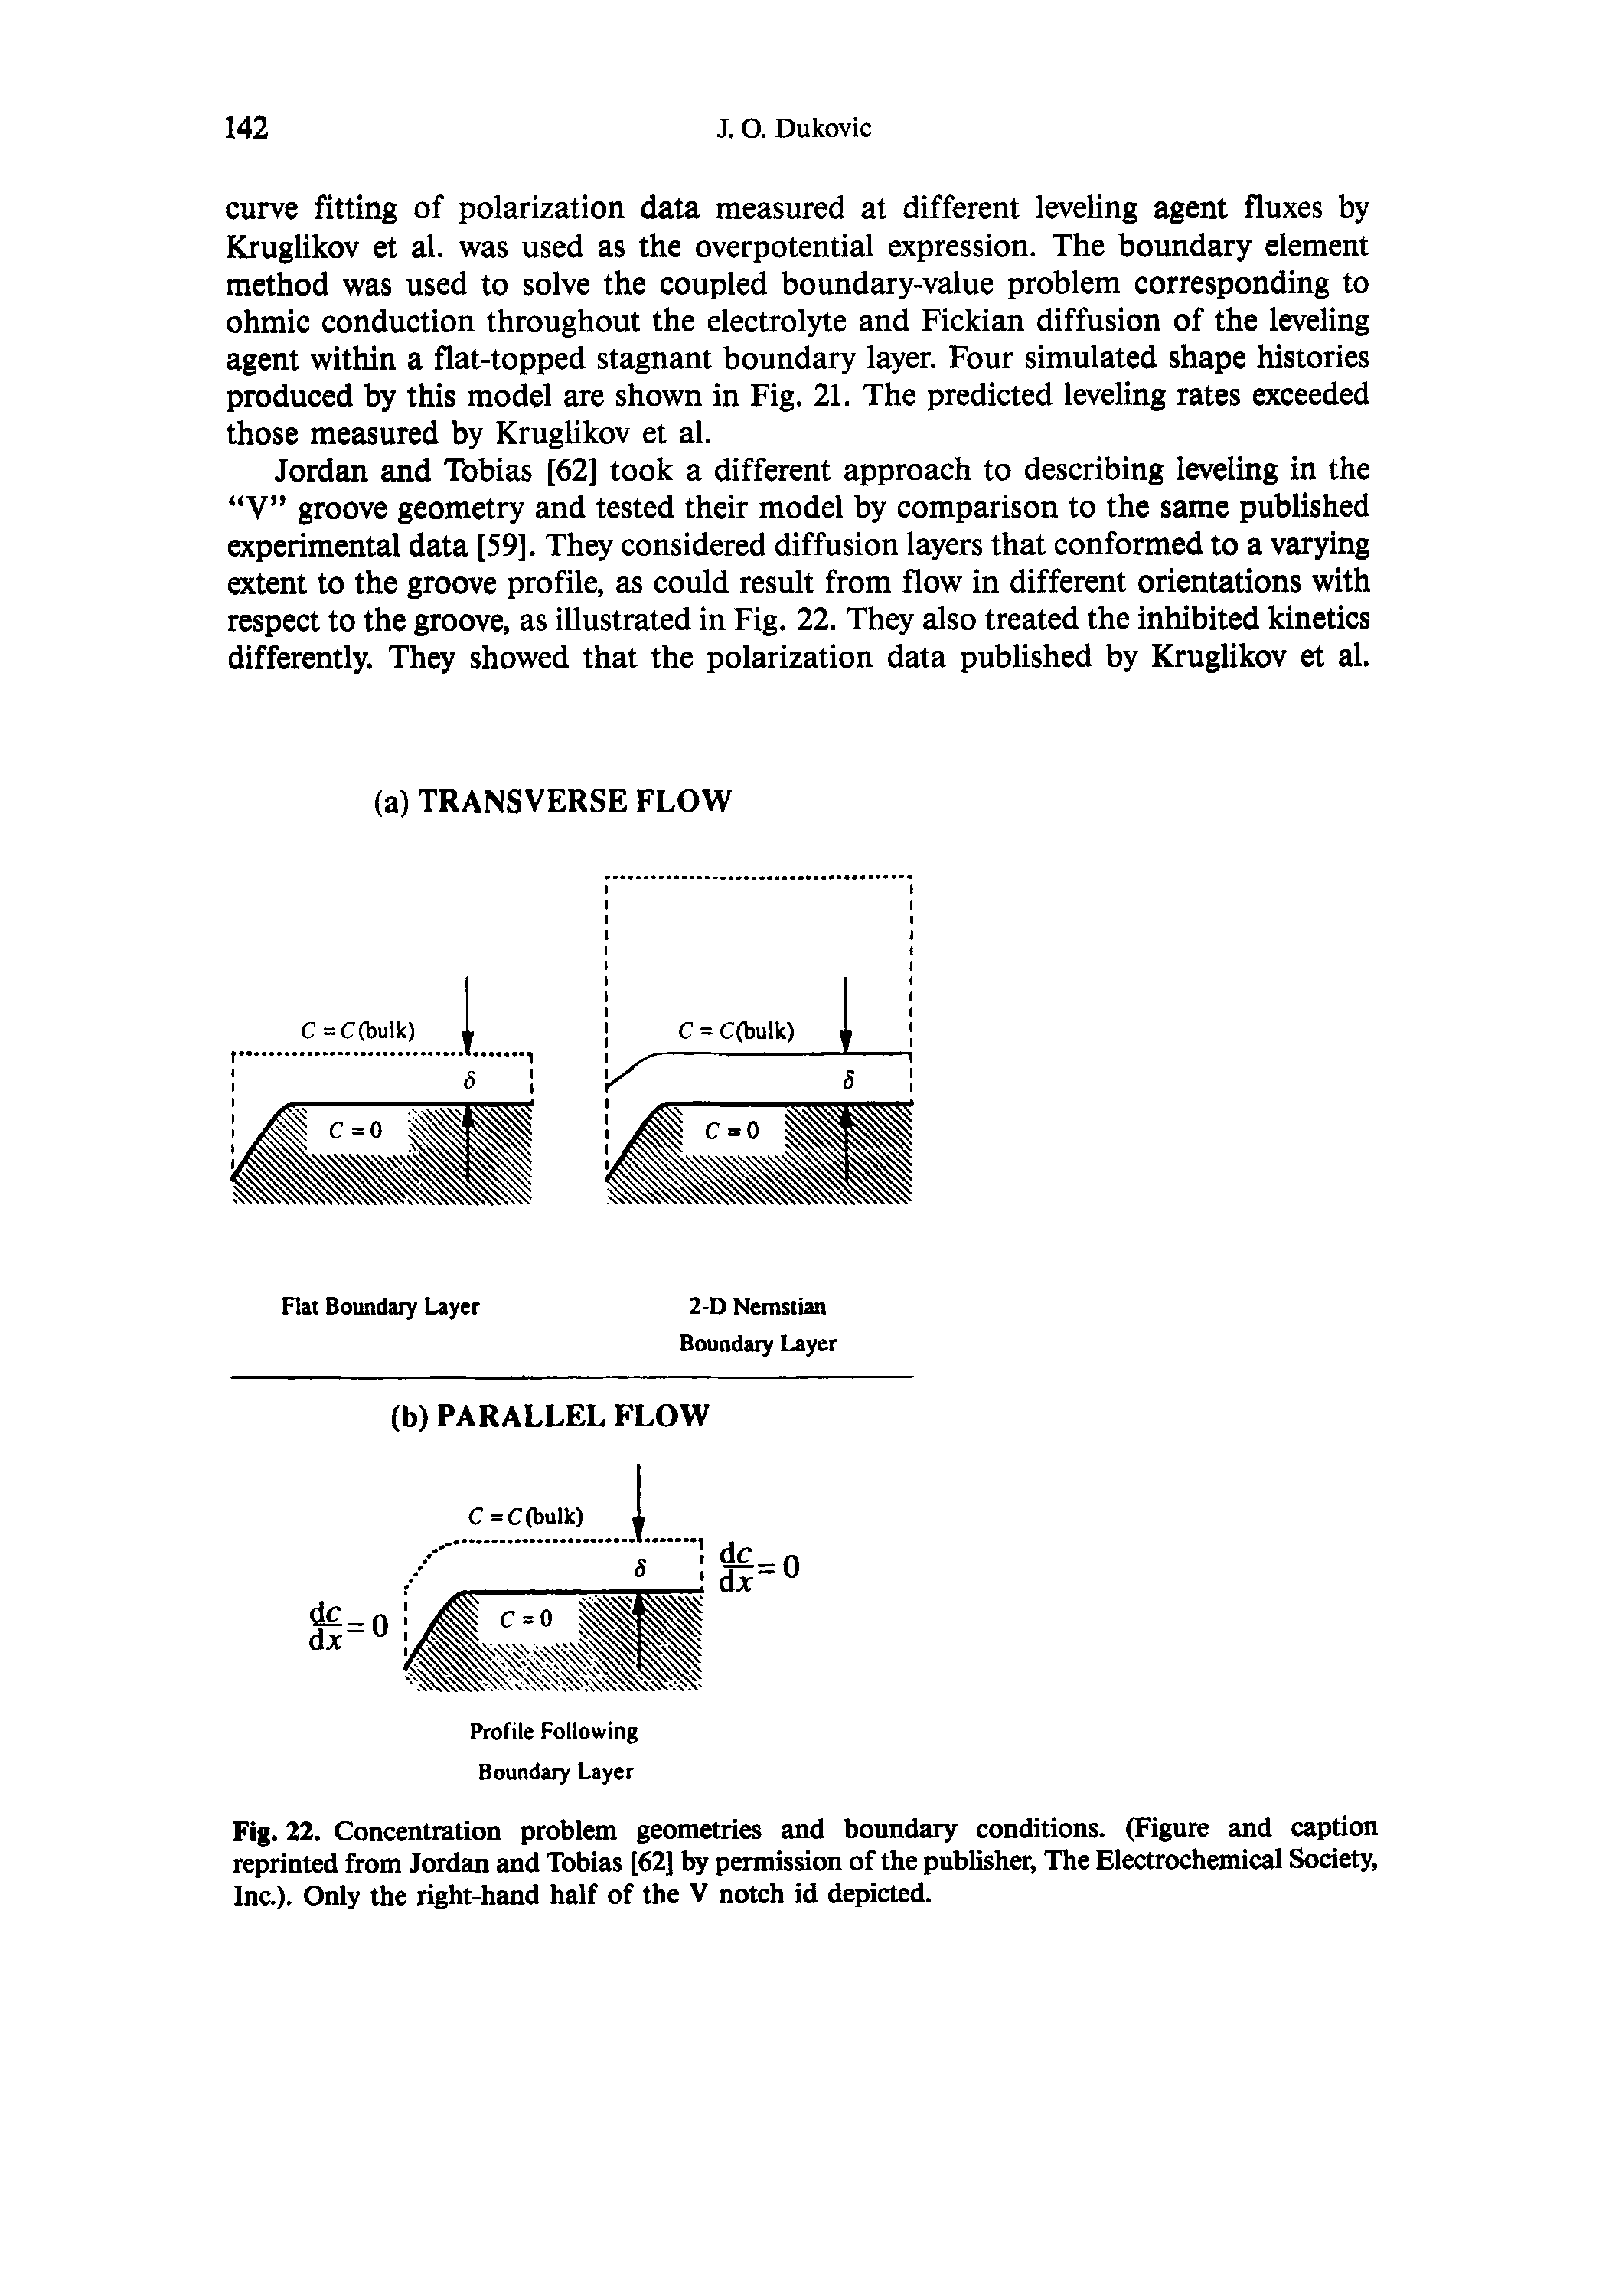 Fig. 22. Concentration problem geometries and boundary conditions. (Figure and caption reprinted from Jordan and Tobias [62] by permission of the publisher. The Electrochemical Society, Inc.). Only the right-hand half of the V notch id depicted.